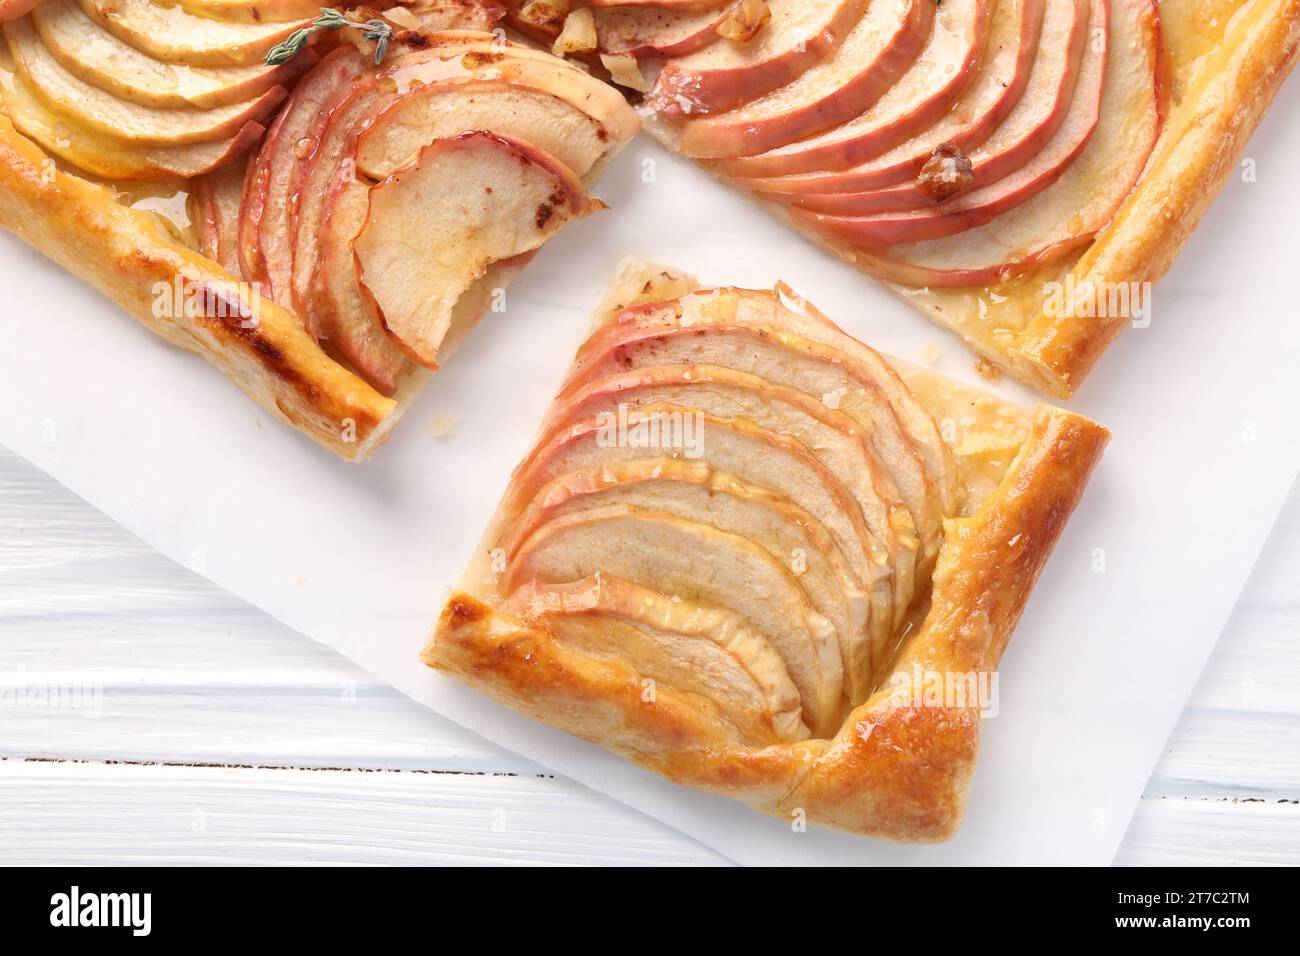 Freshly baked apple pie on white wooden table, top view Stock Photo